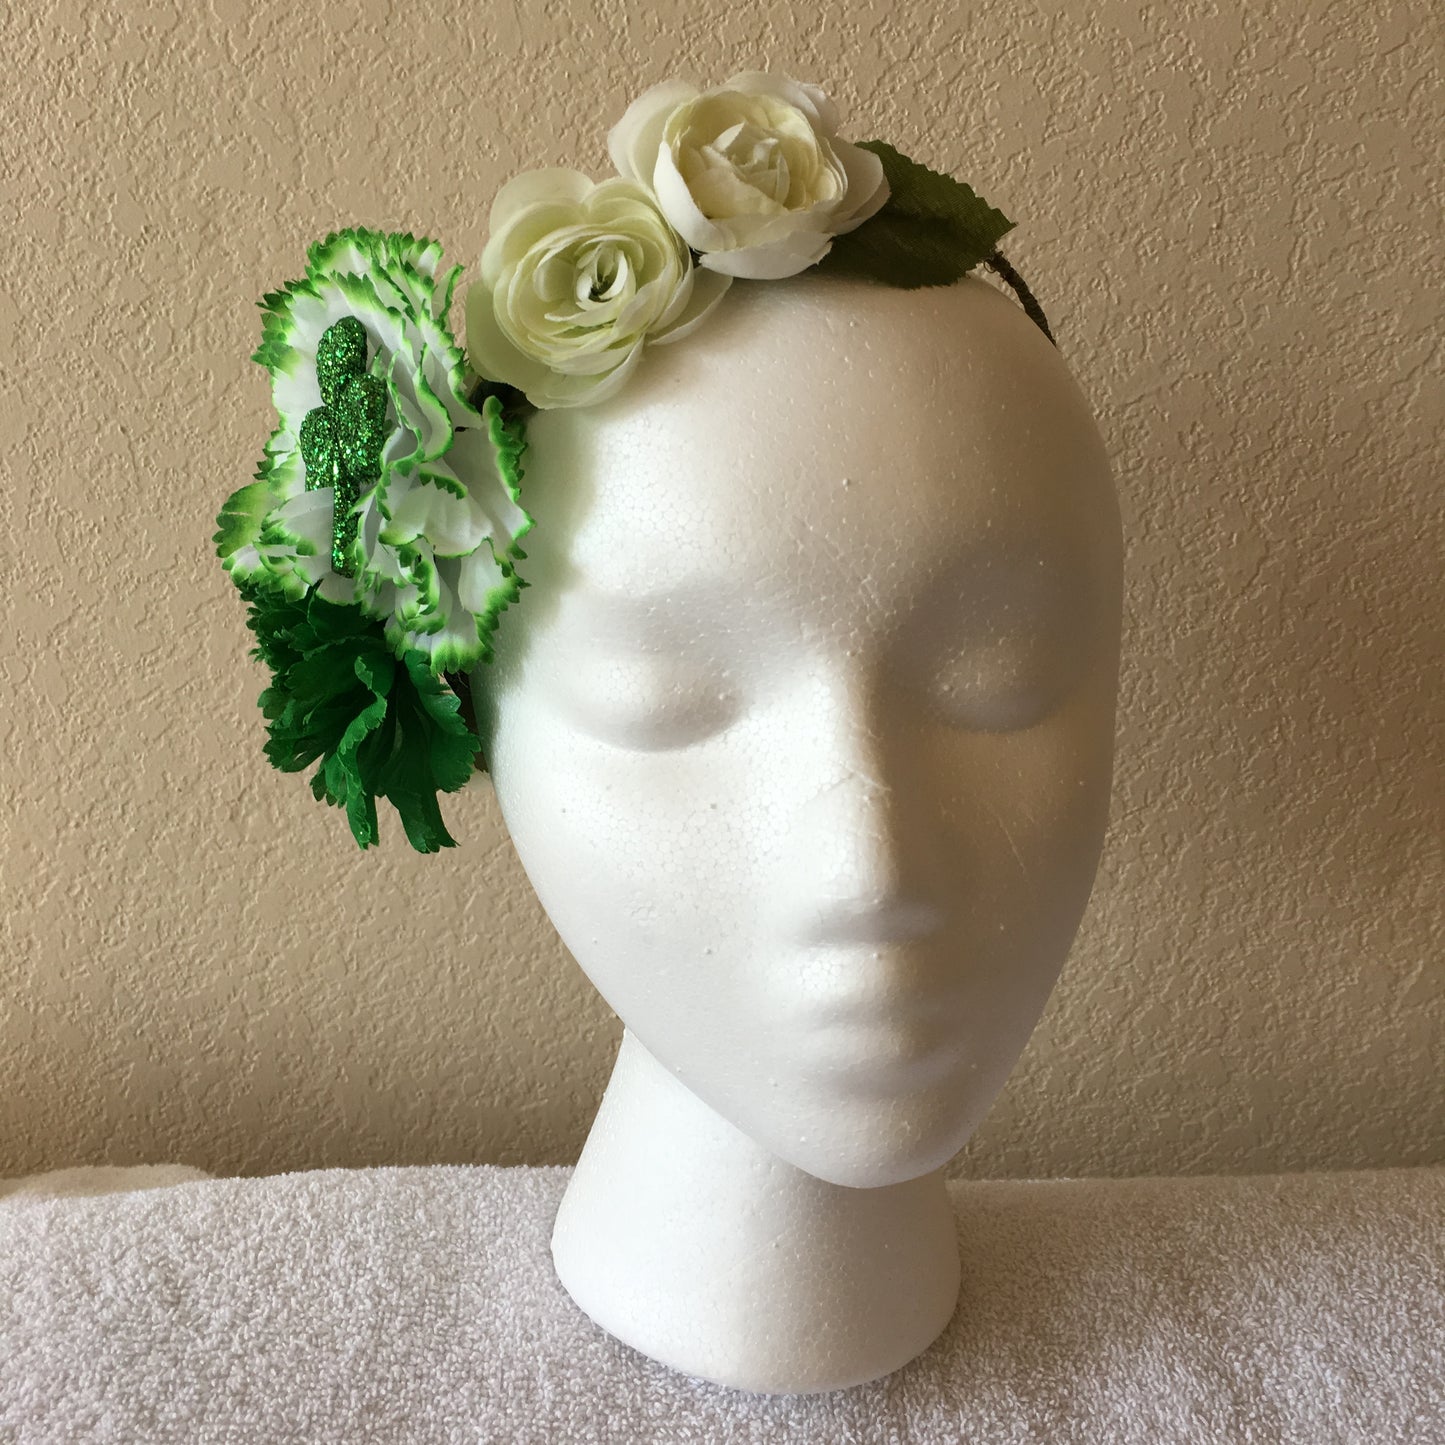 Show Special Side Wreath - Dark green & green tipped carnation w/ three pale green roses w/ one shamrock